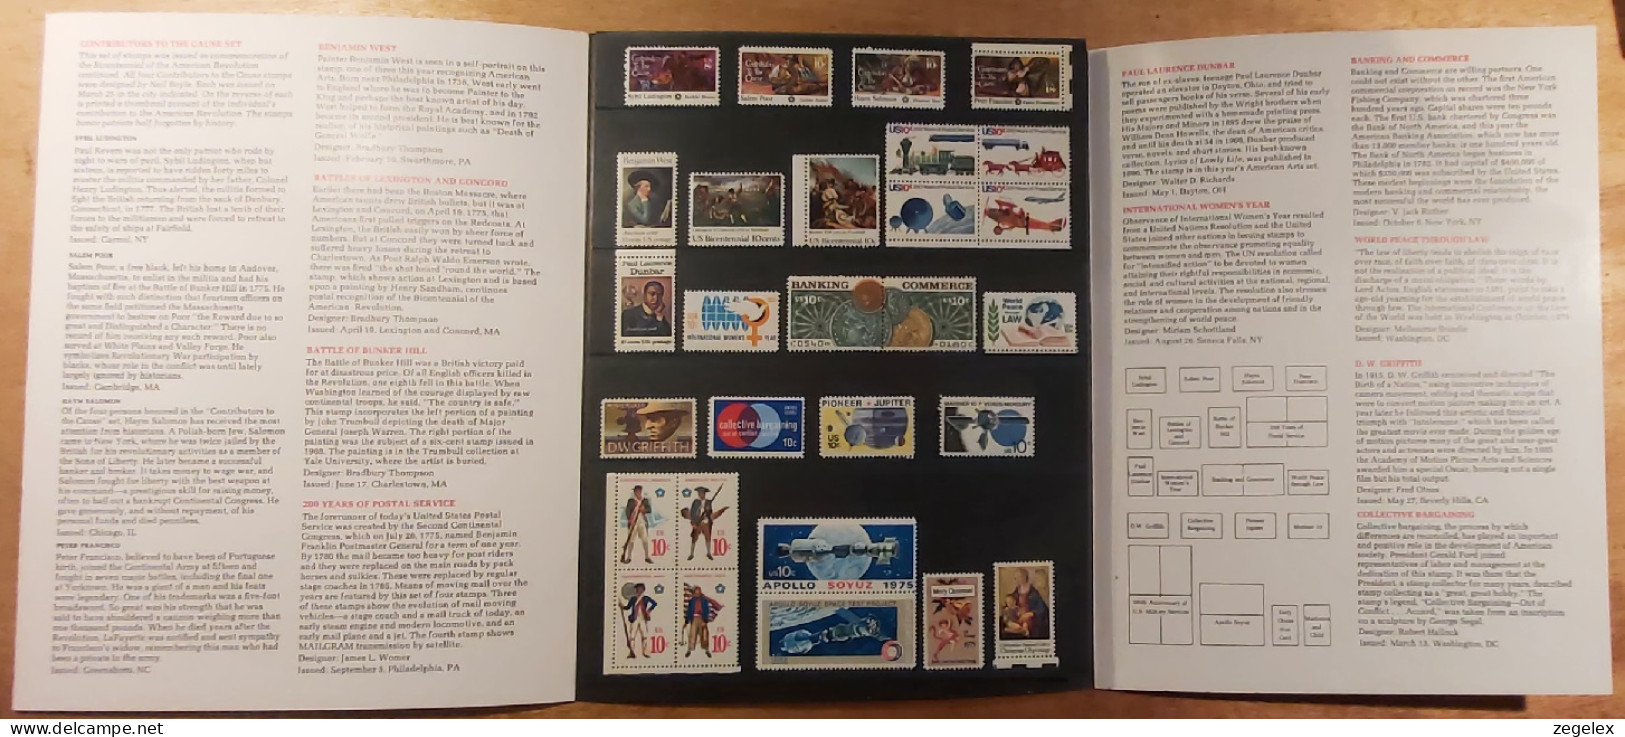 USA Postal Service Mint Set Of 1975 Commemorative And Special Stamps. MNH** - Full Years